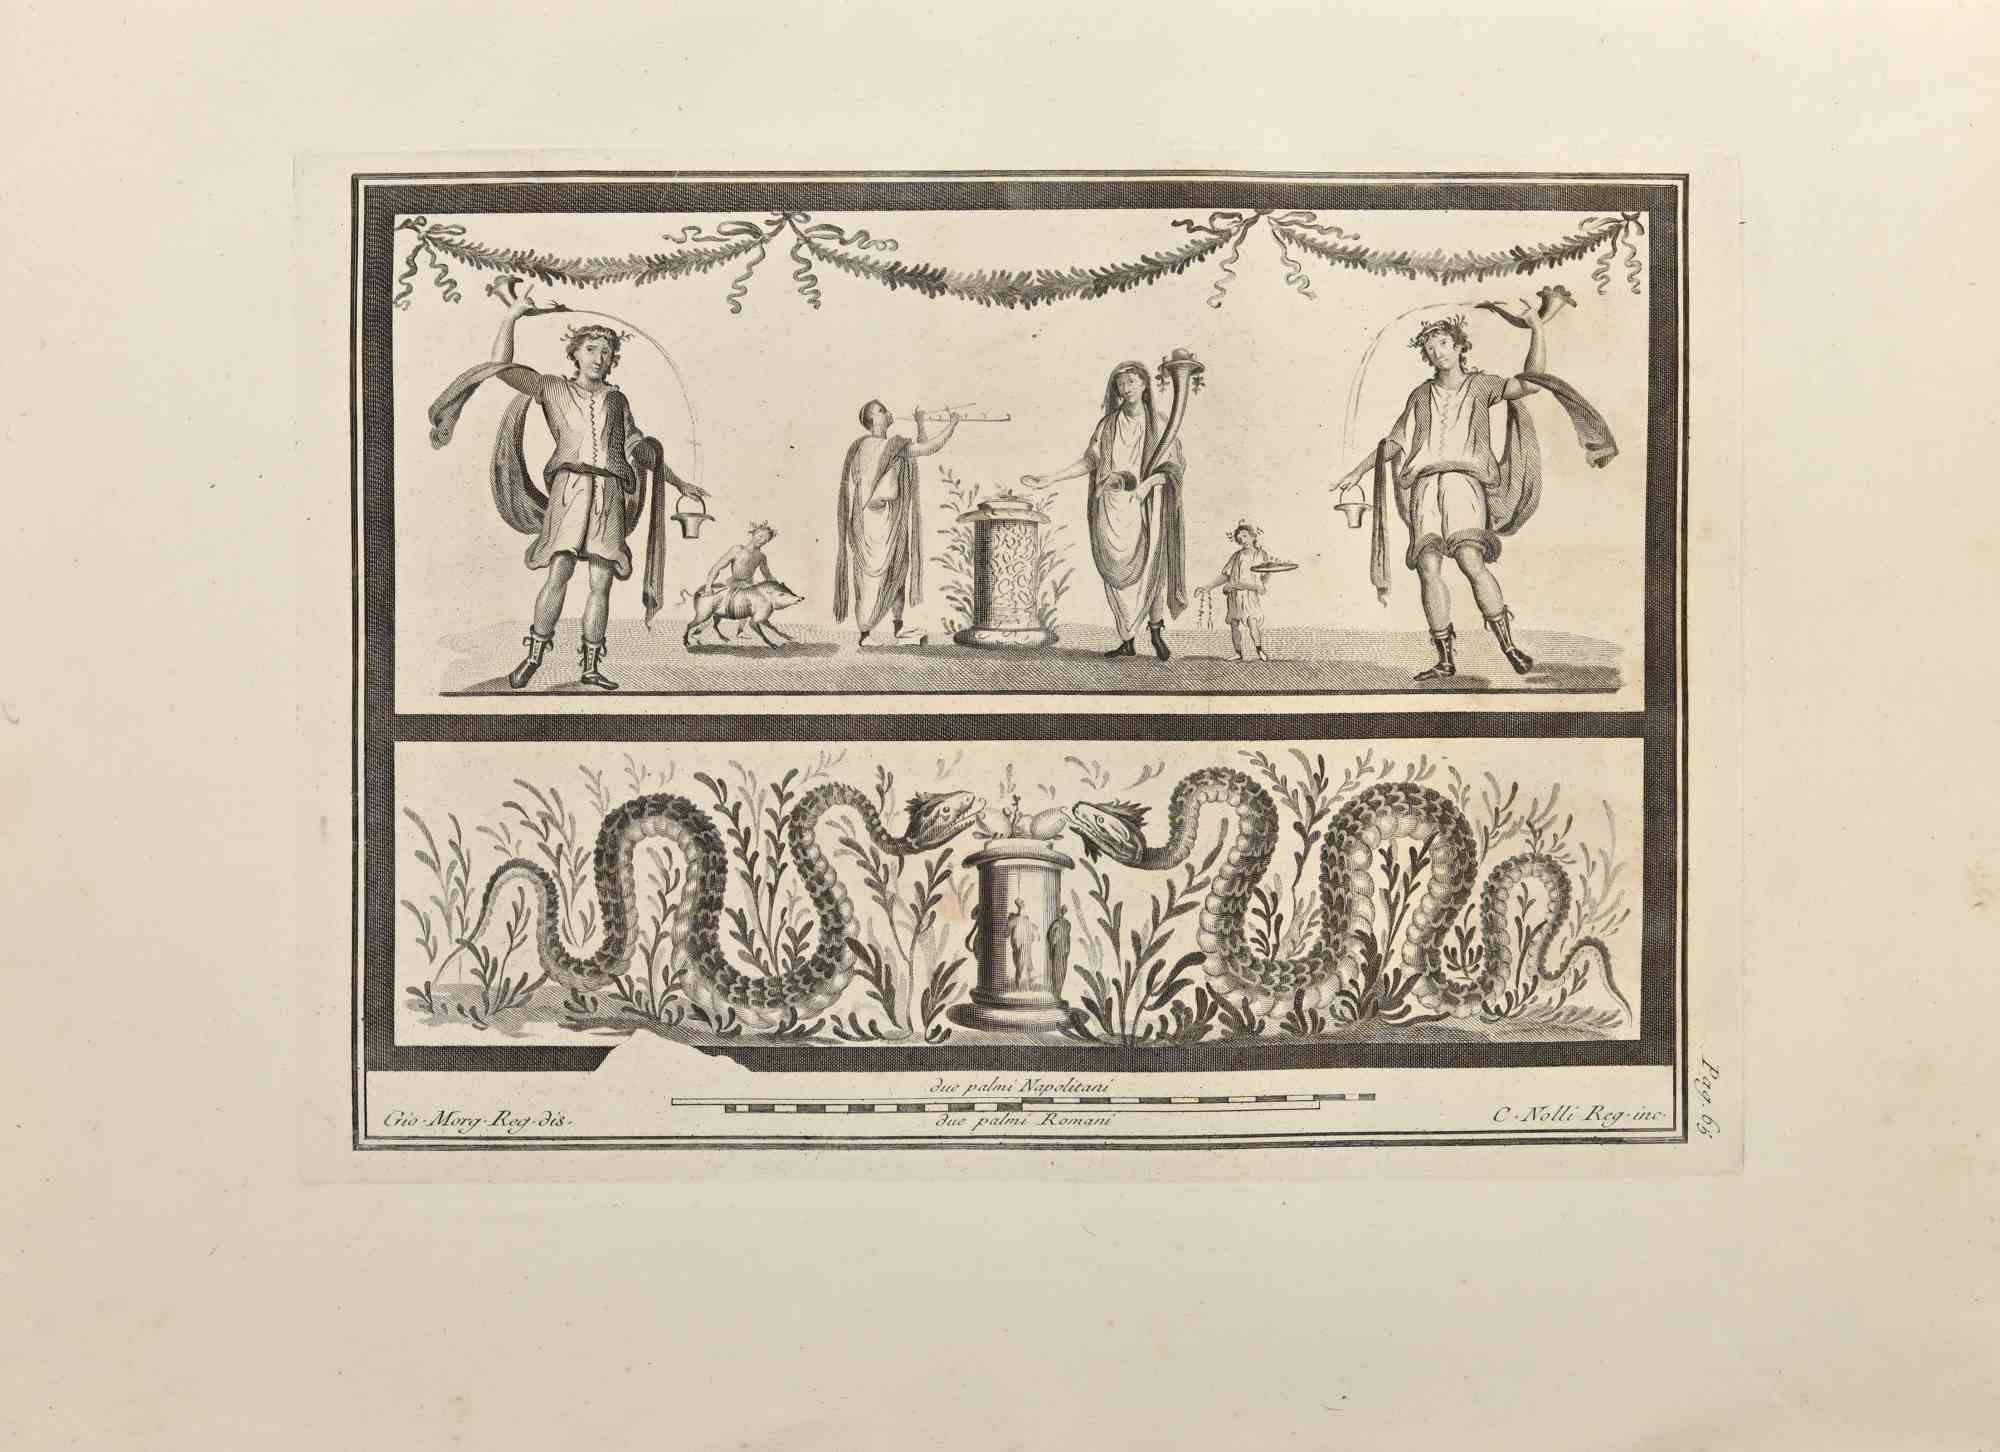 Serpents and Roman Ceremony from "Antiquities of Herculaneum" is an etching on paper realized by Carlo Nolli in the 18th Century.

Signed on the plate.

Good conditions with some foxing and folding due to the time.

The etching belongs to the print